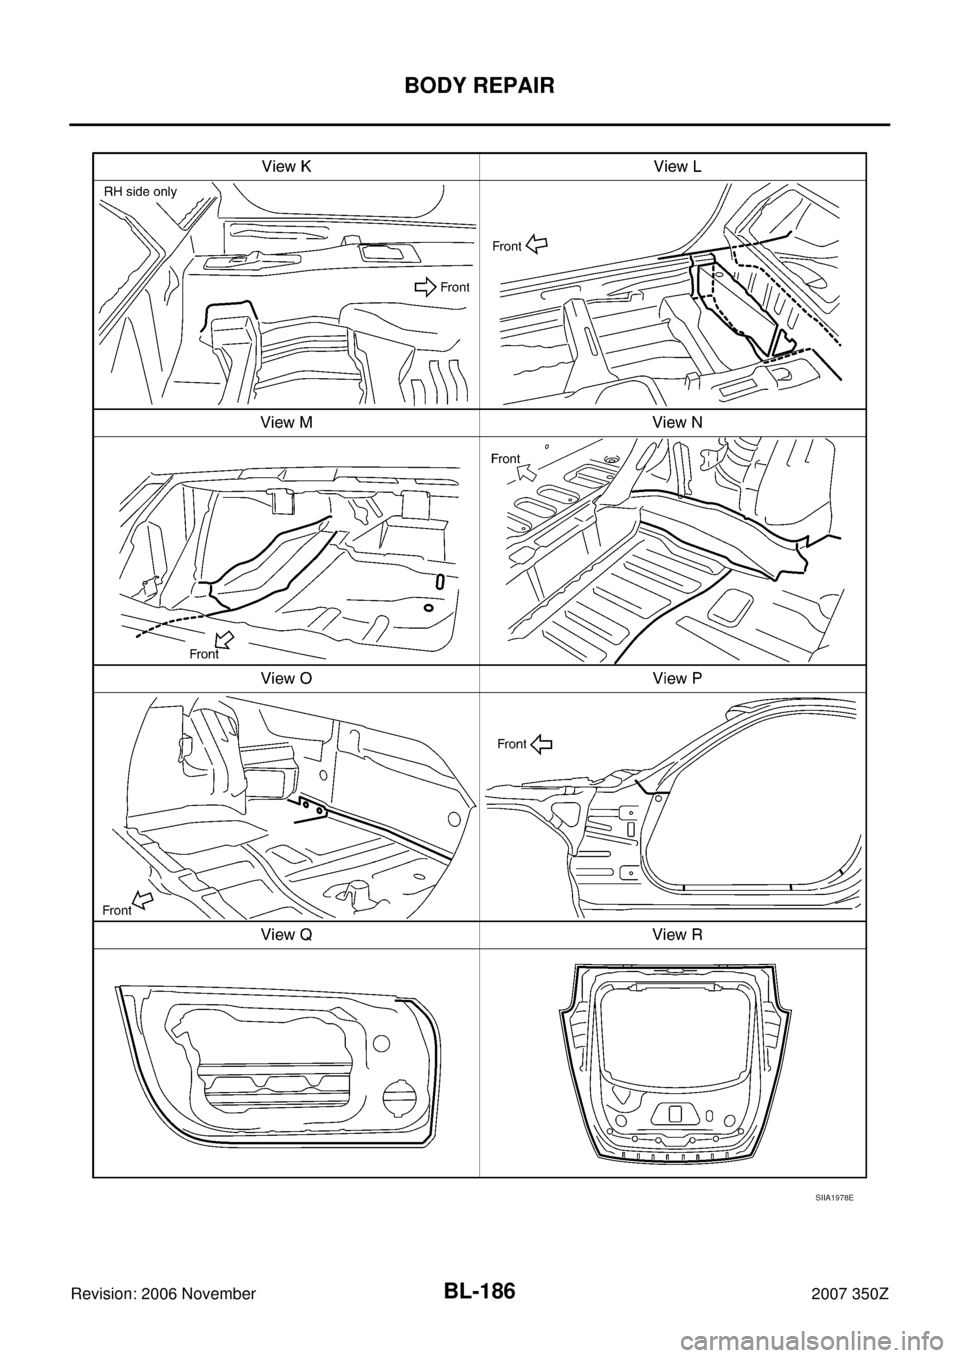 NISSAN 350Z 2007 Z33 Body, Lock And Security System Workshop Manual BL-186
BODY REPAIR
Revision: 2006 November2007 350Z
SIIA1978E 